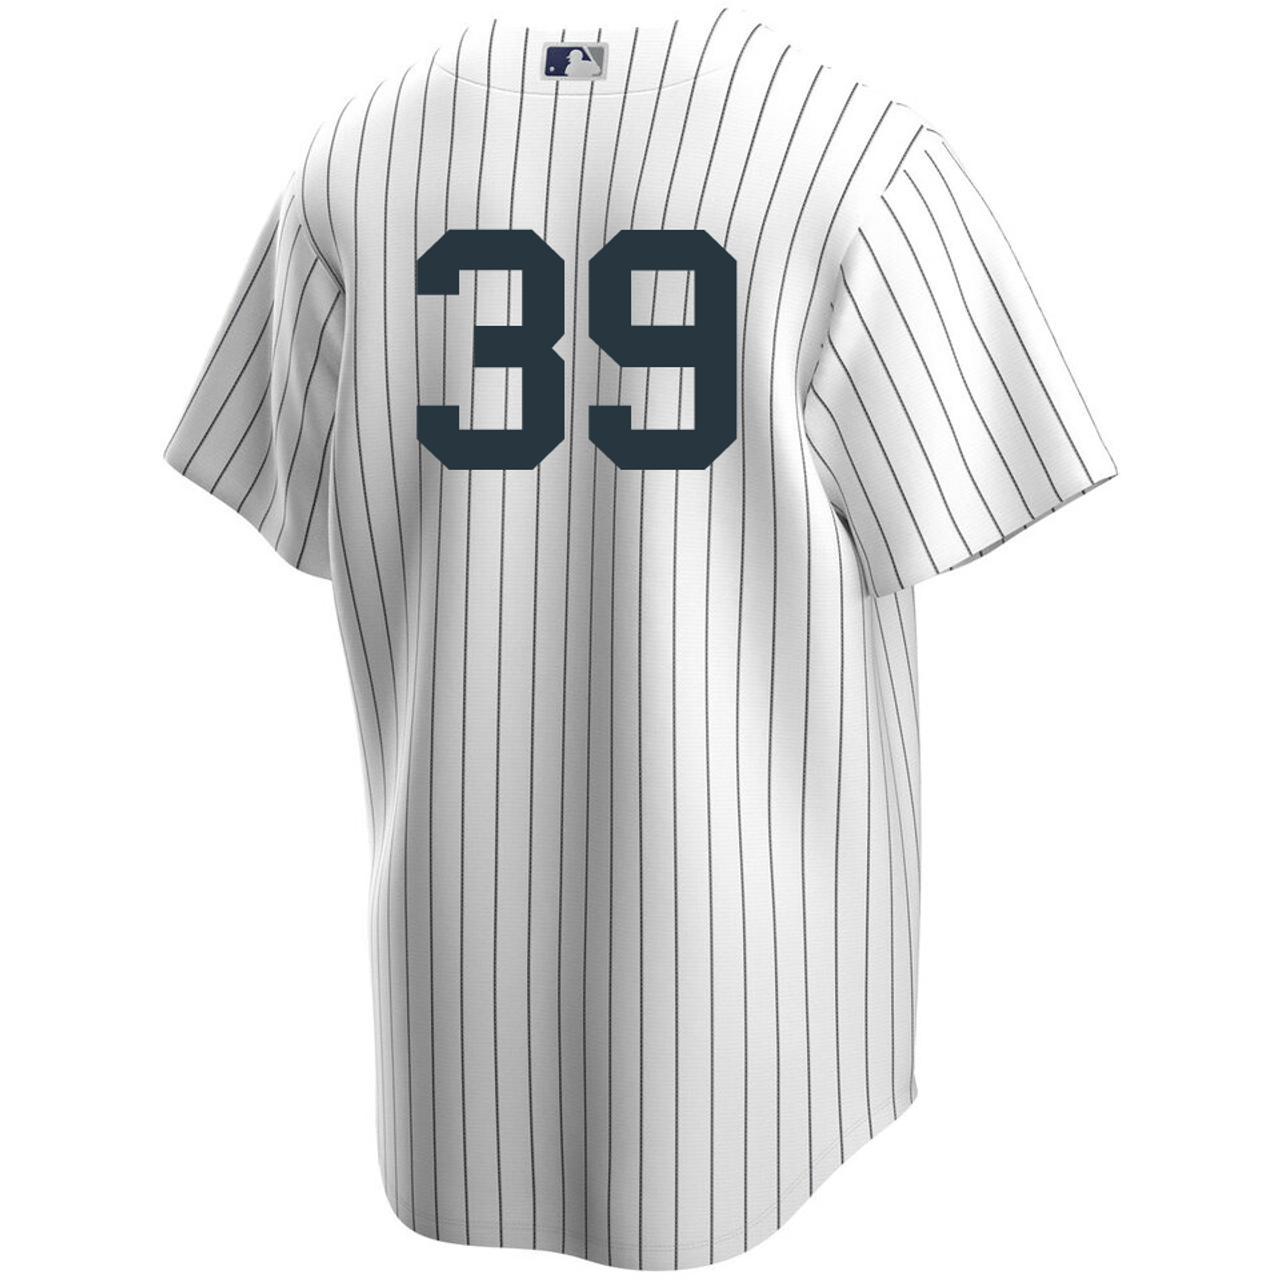 Jose Trevino No Name Jersey - NY Yankees Number Only Replica